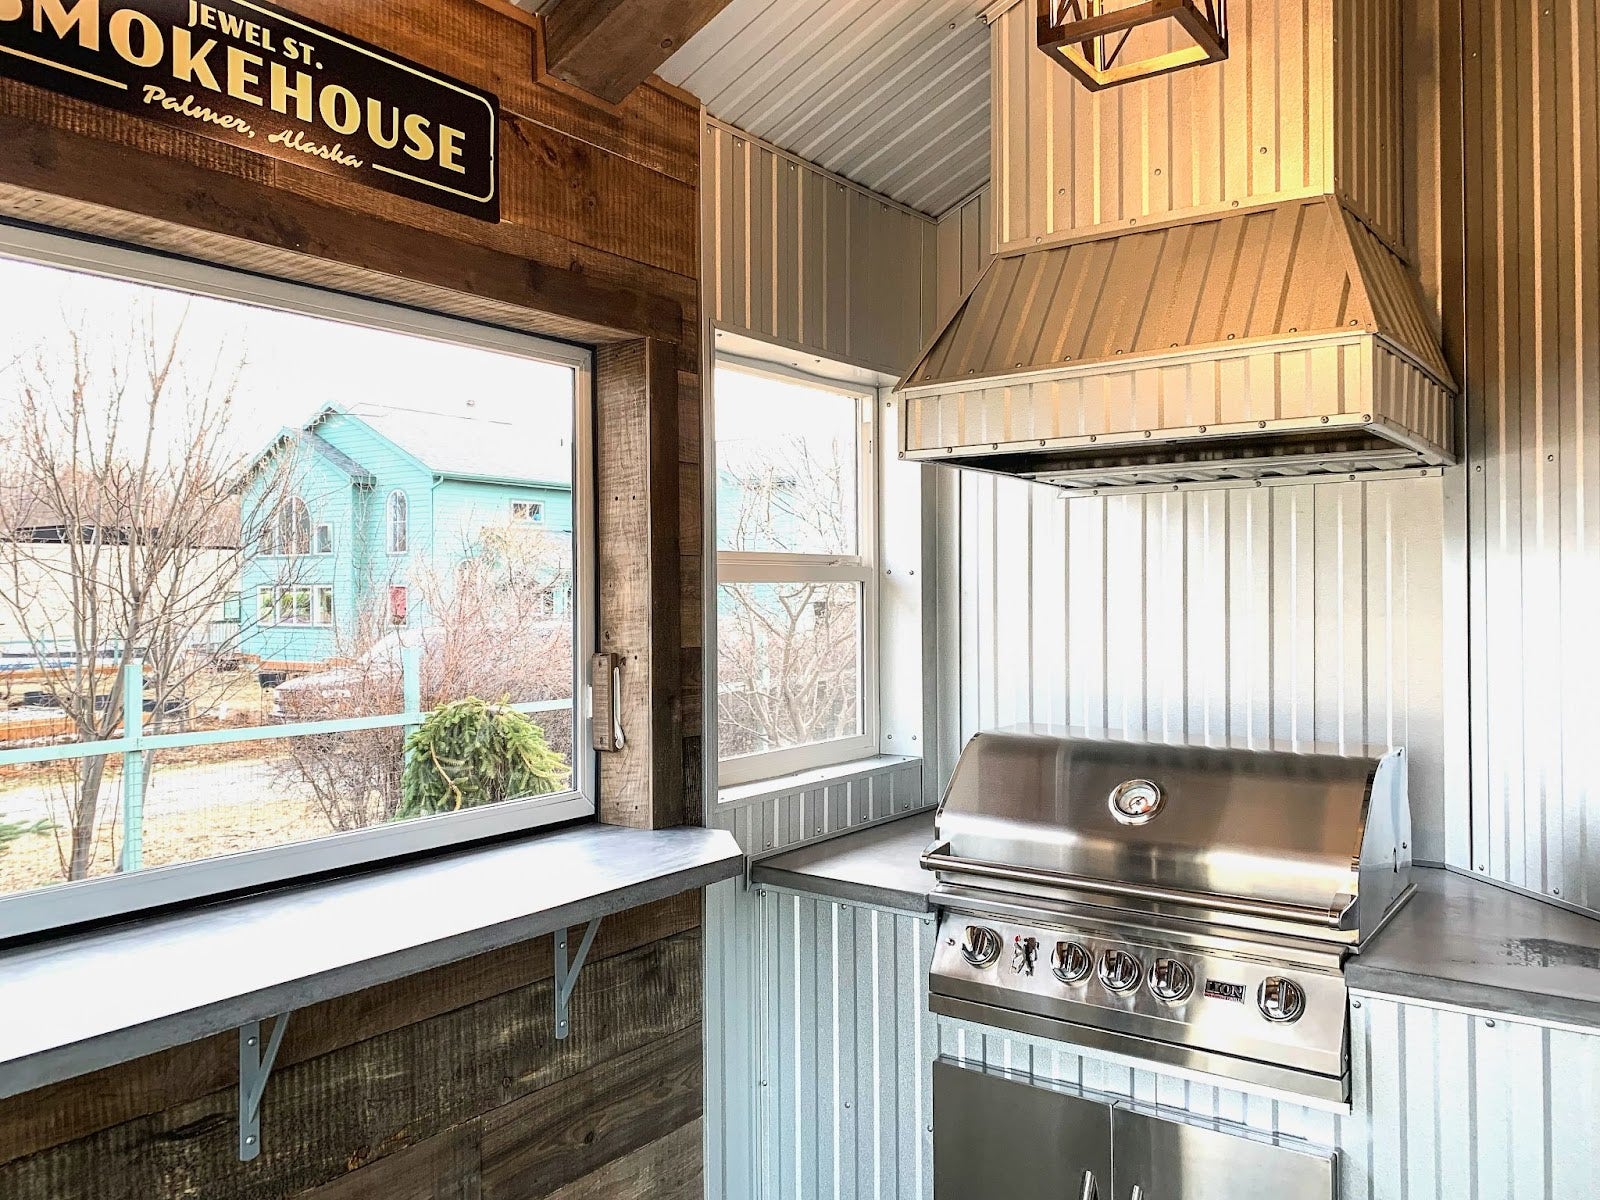 Rustic metal-clad outdoor kitchen with a Proline range hood, providing a unique culinary experience with a view - prolinerangehoods.com